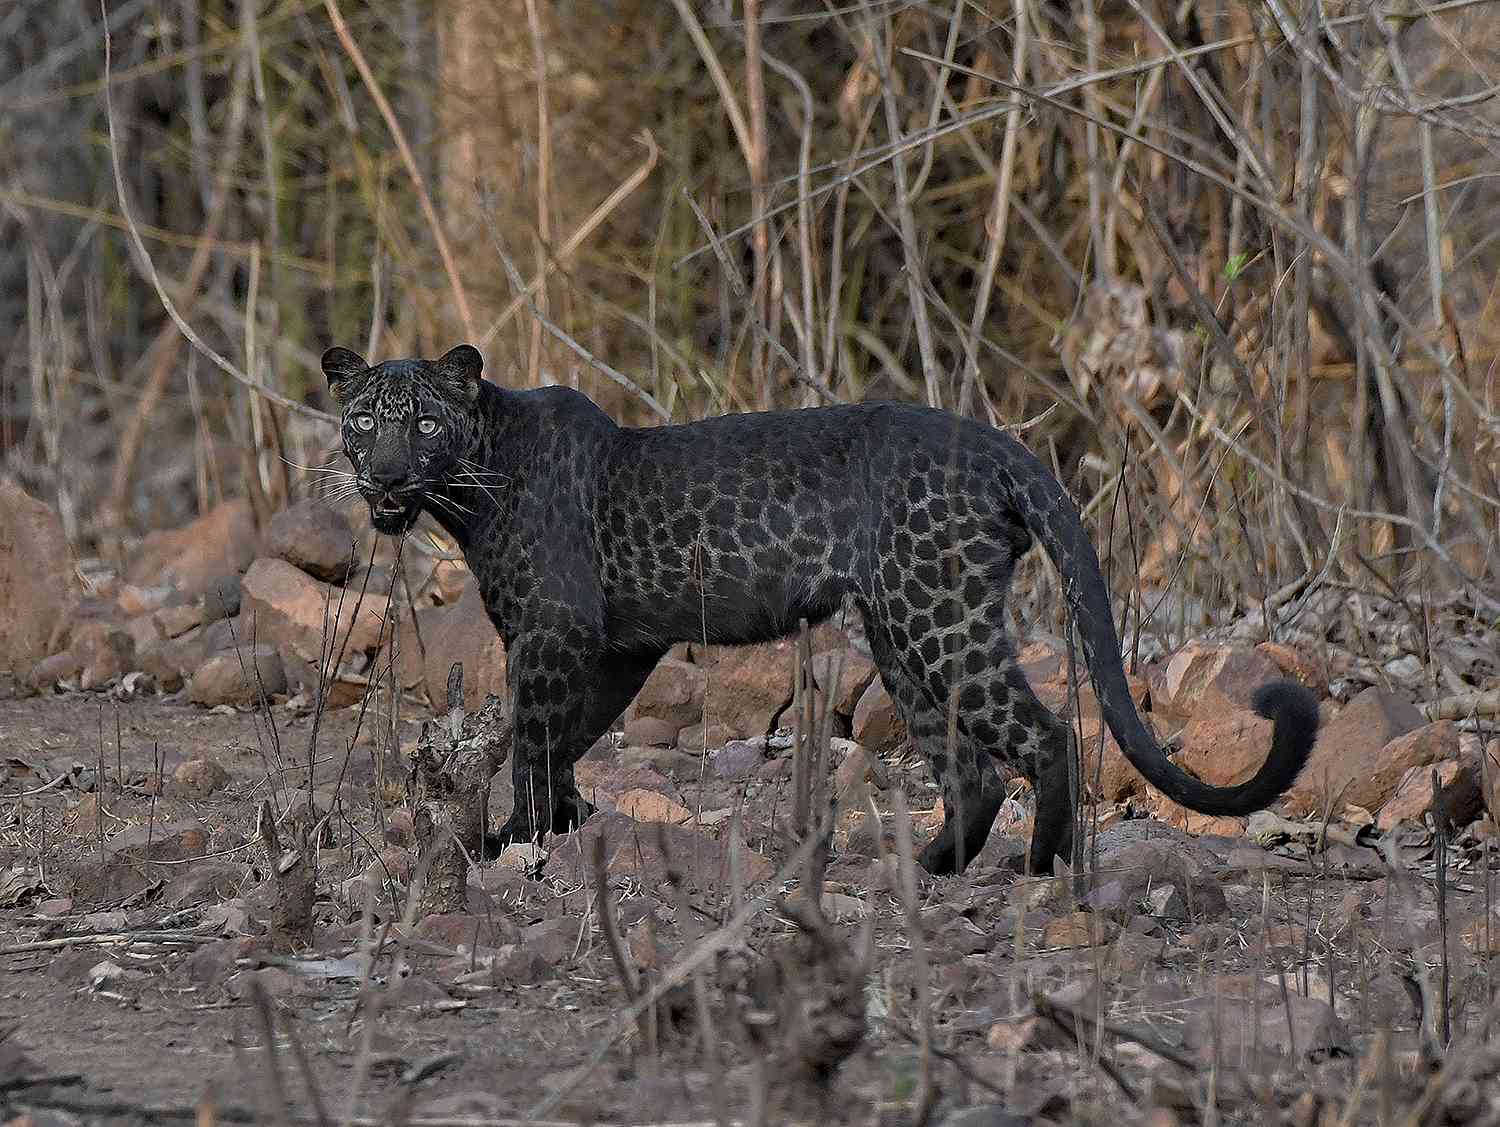 Rare Black Leopard Spotted in India | PEOPLE.com